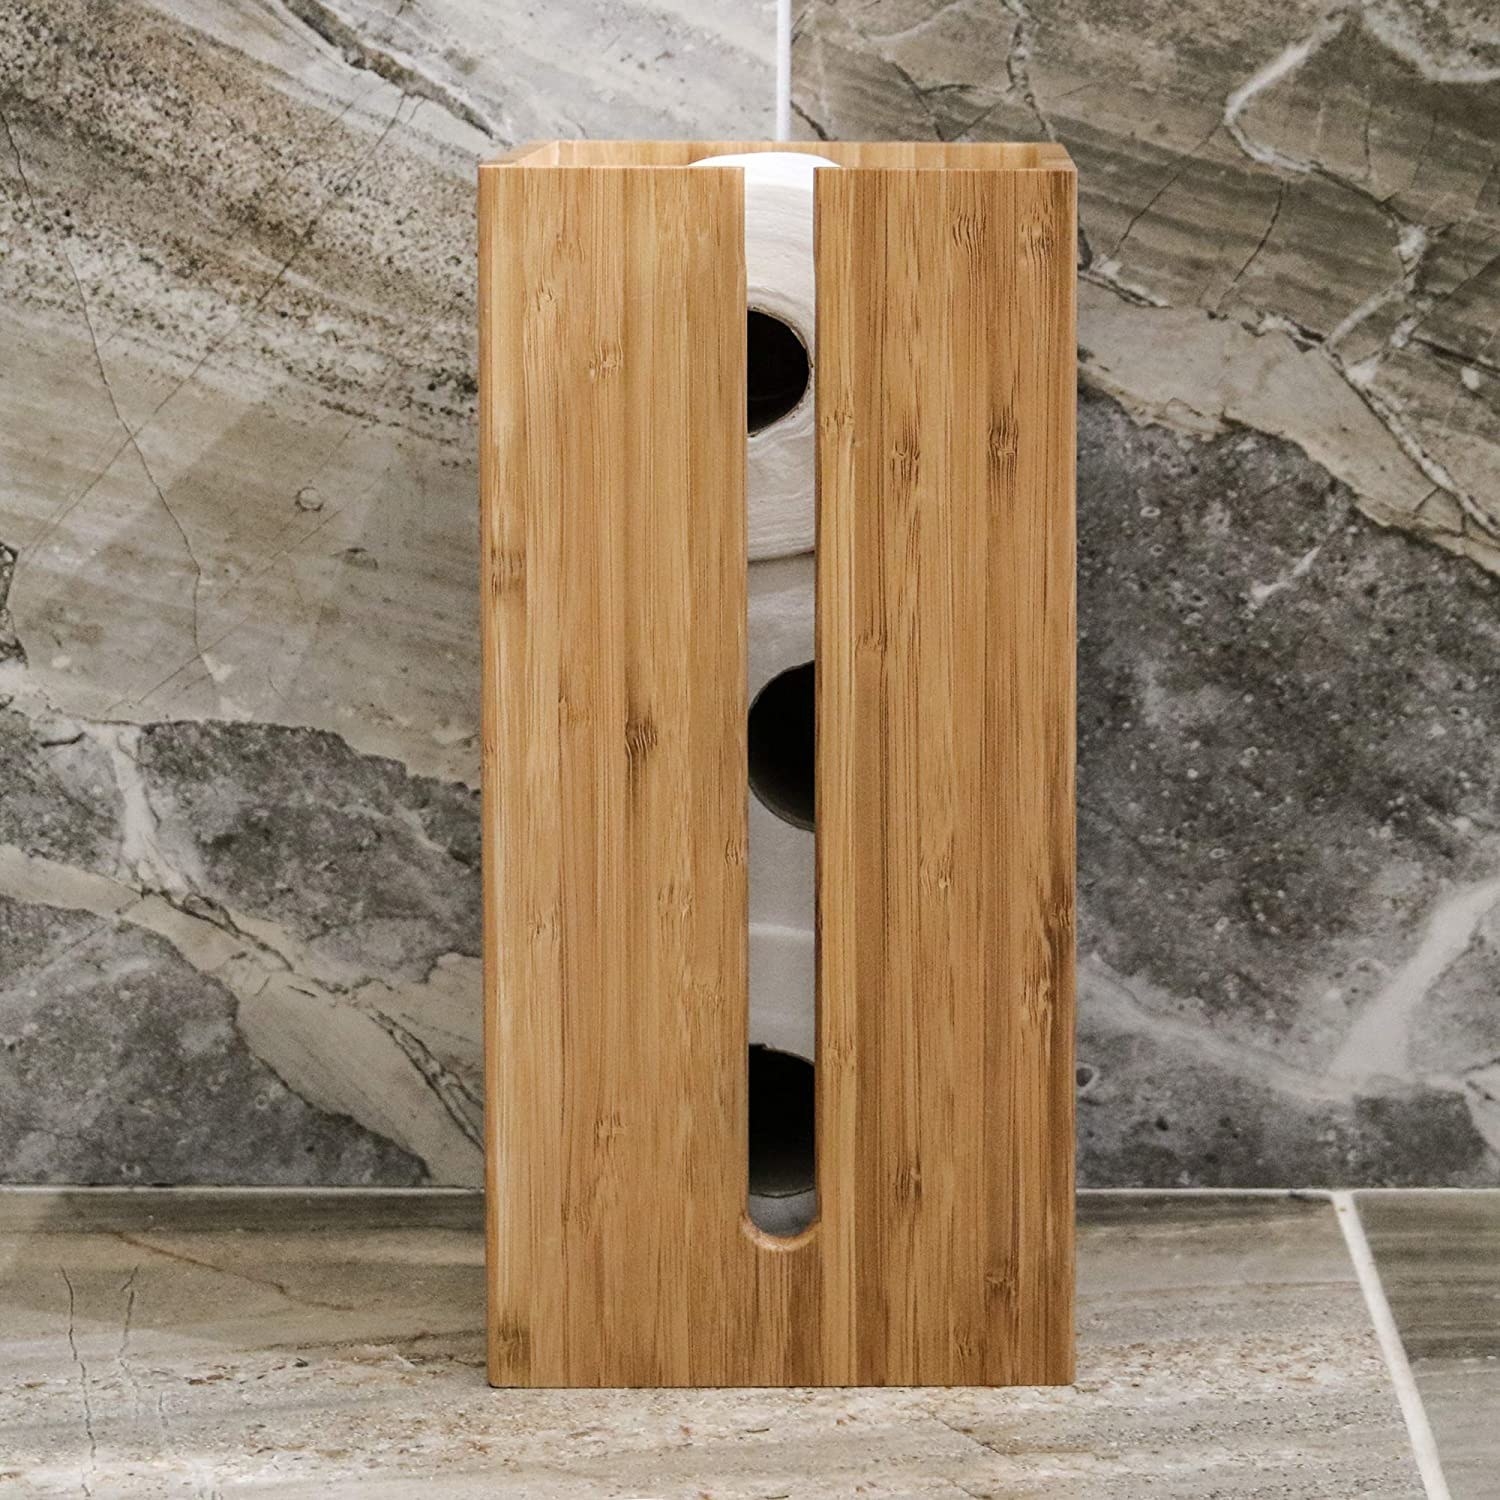 a bamboo toilet paper rack that hides the rolls inside